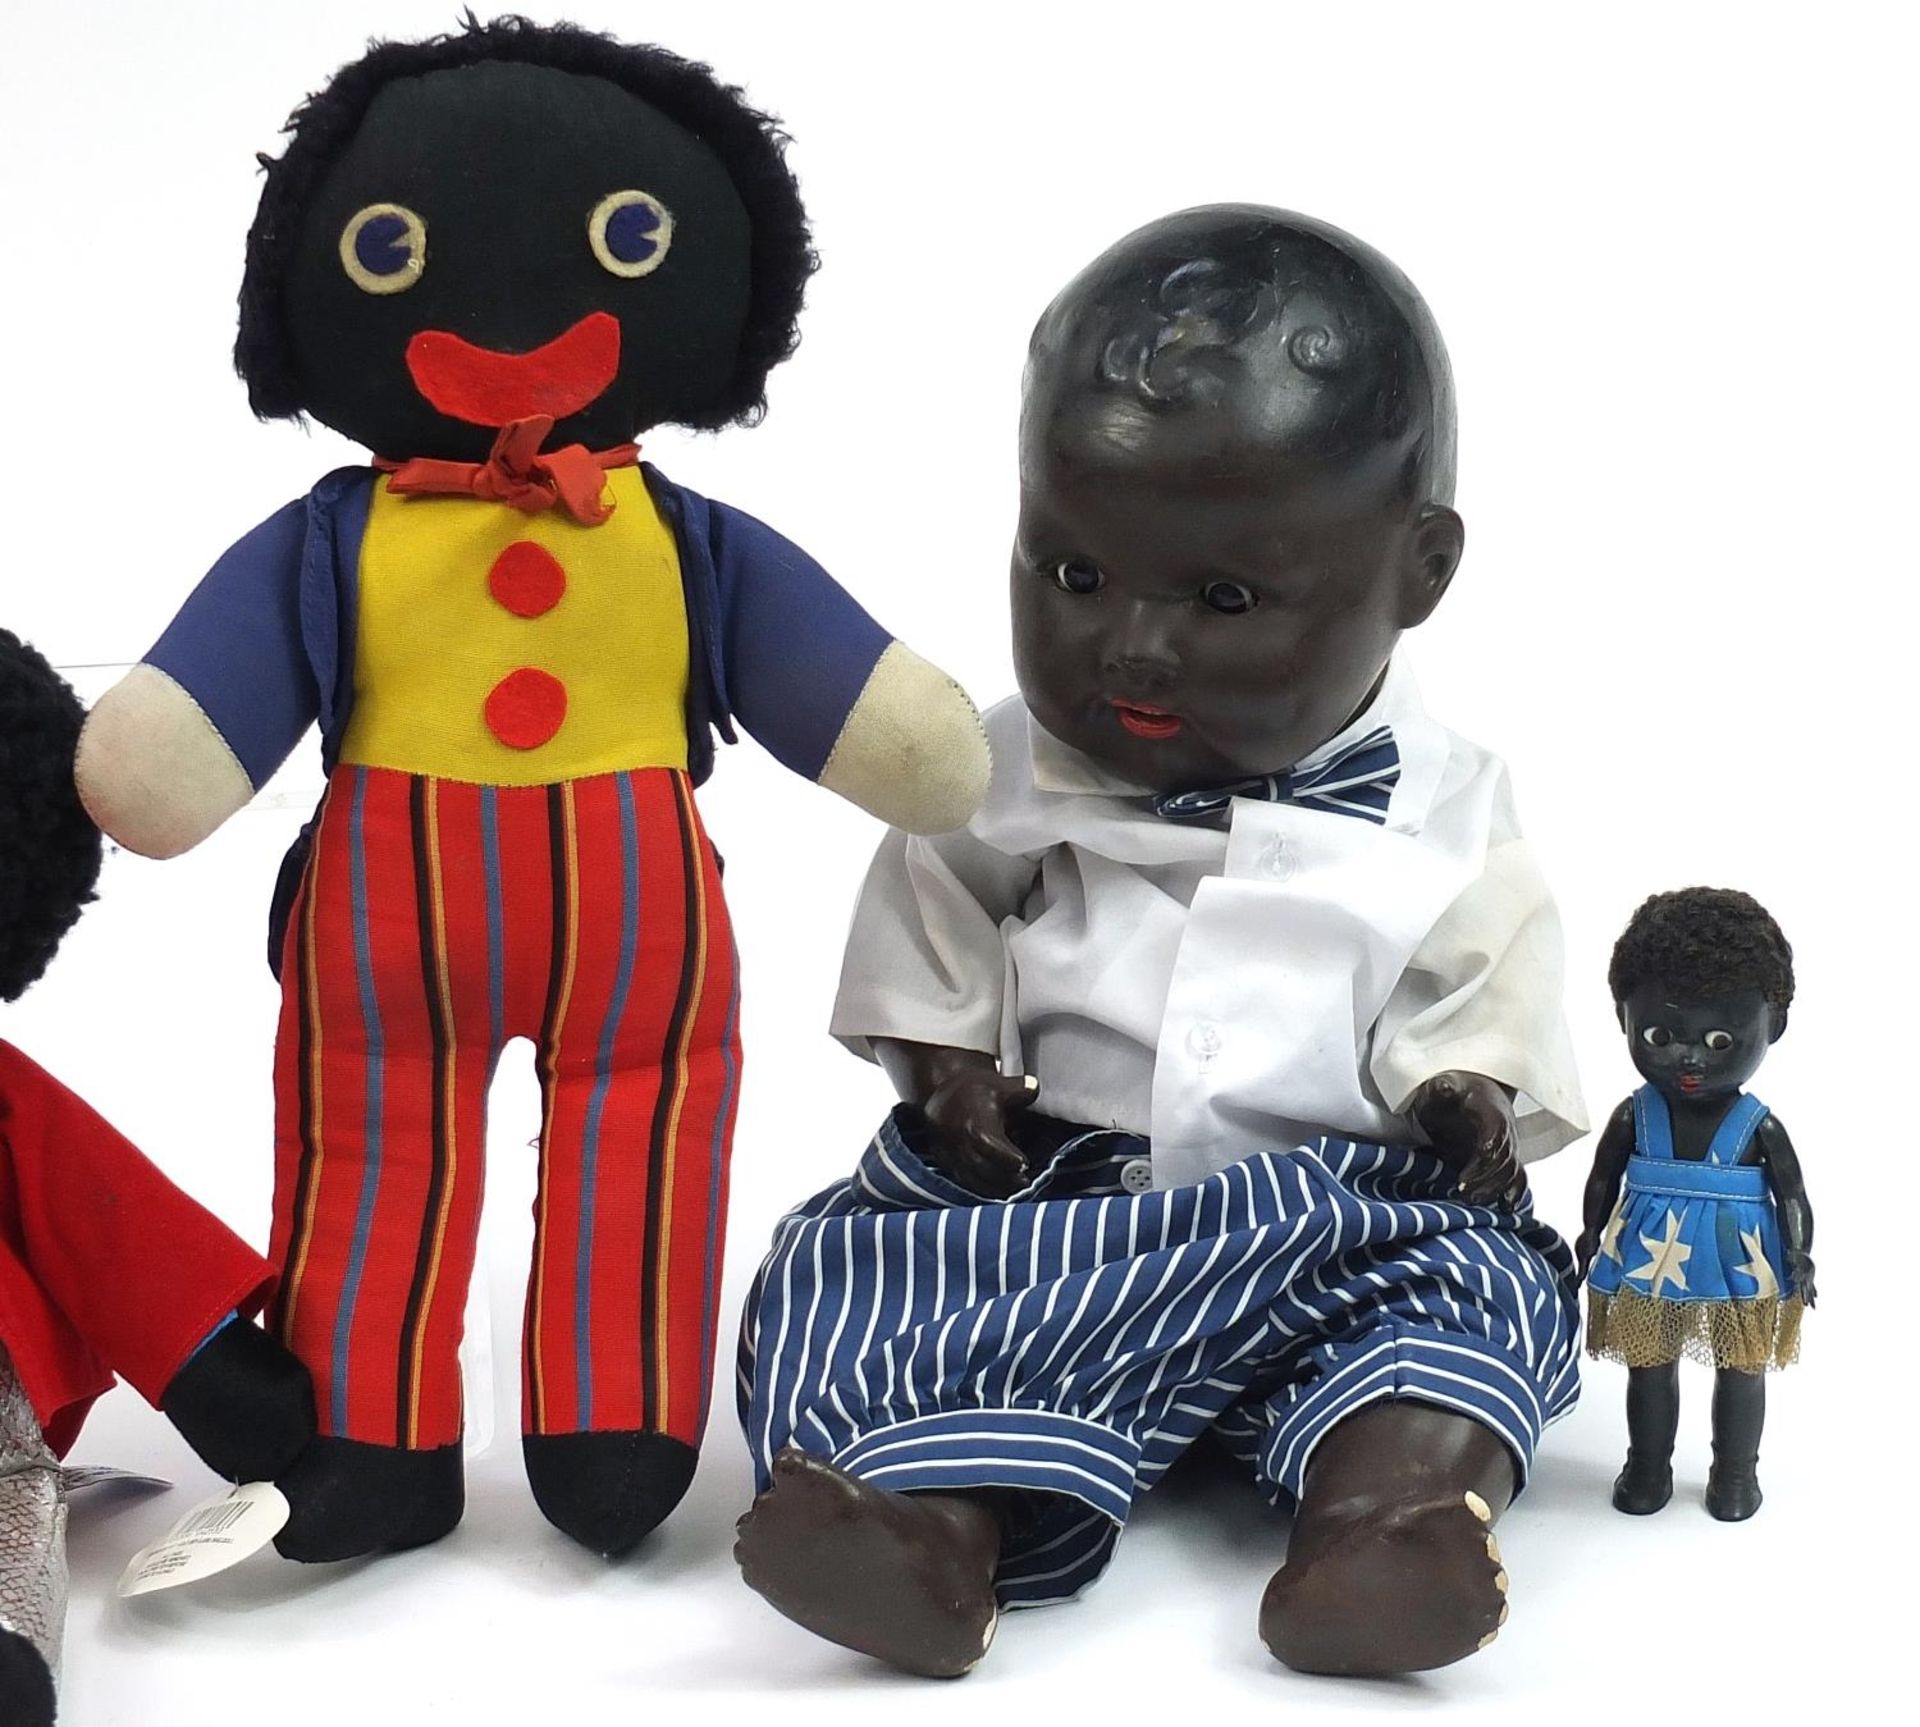 Large Armand Marseille black bisque headed doll, four soft toy Golly dolls and a miniature - Image 3 of 4